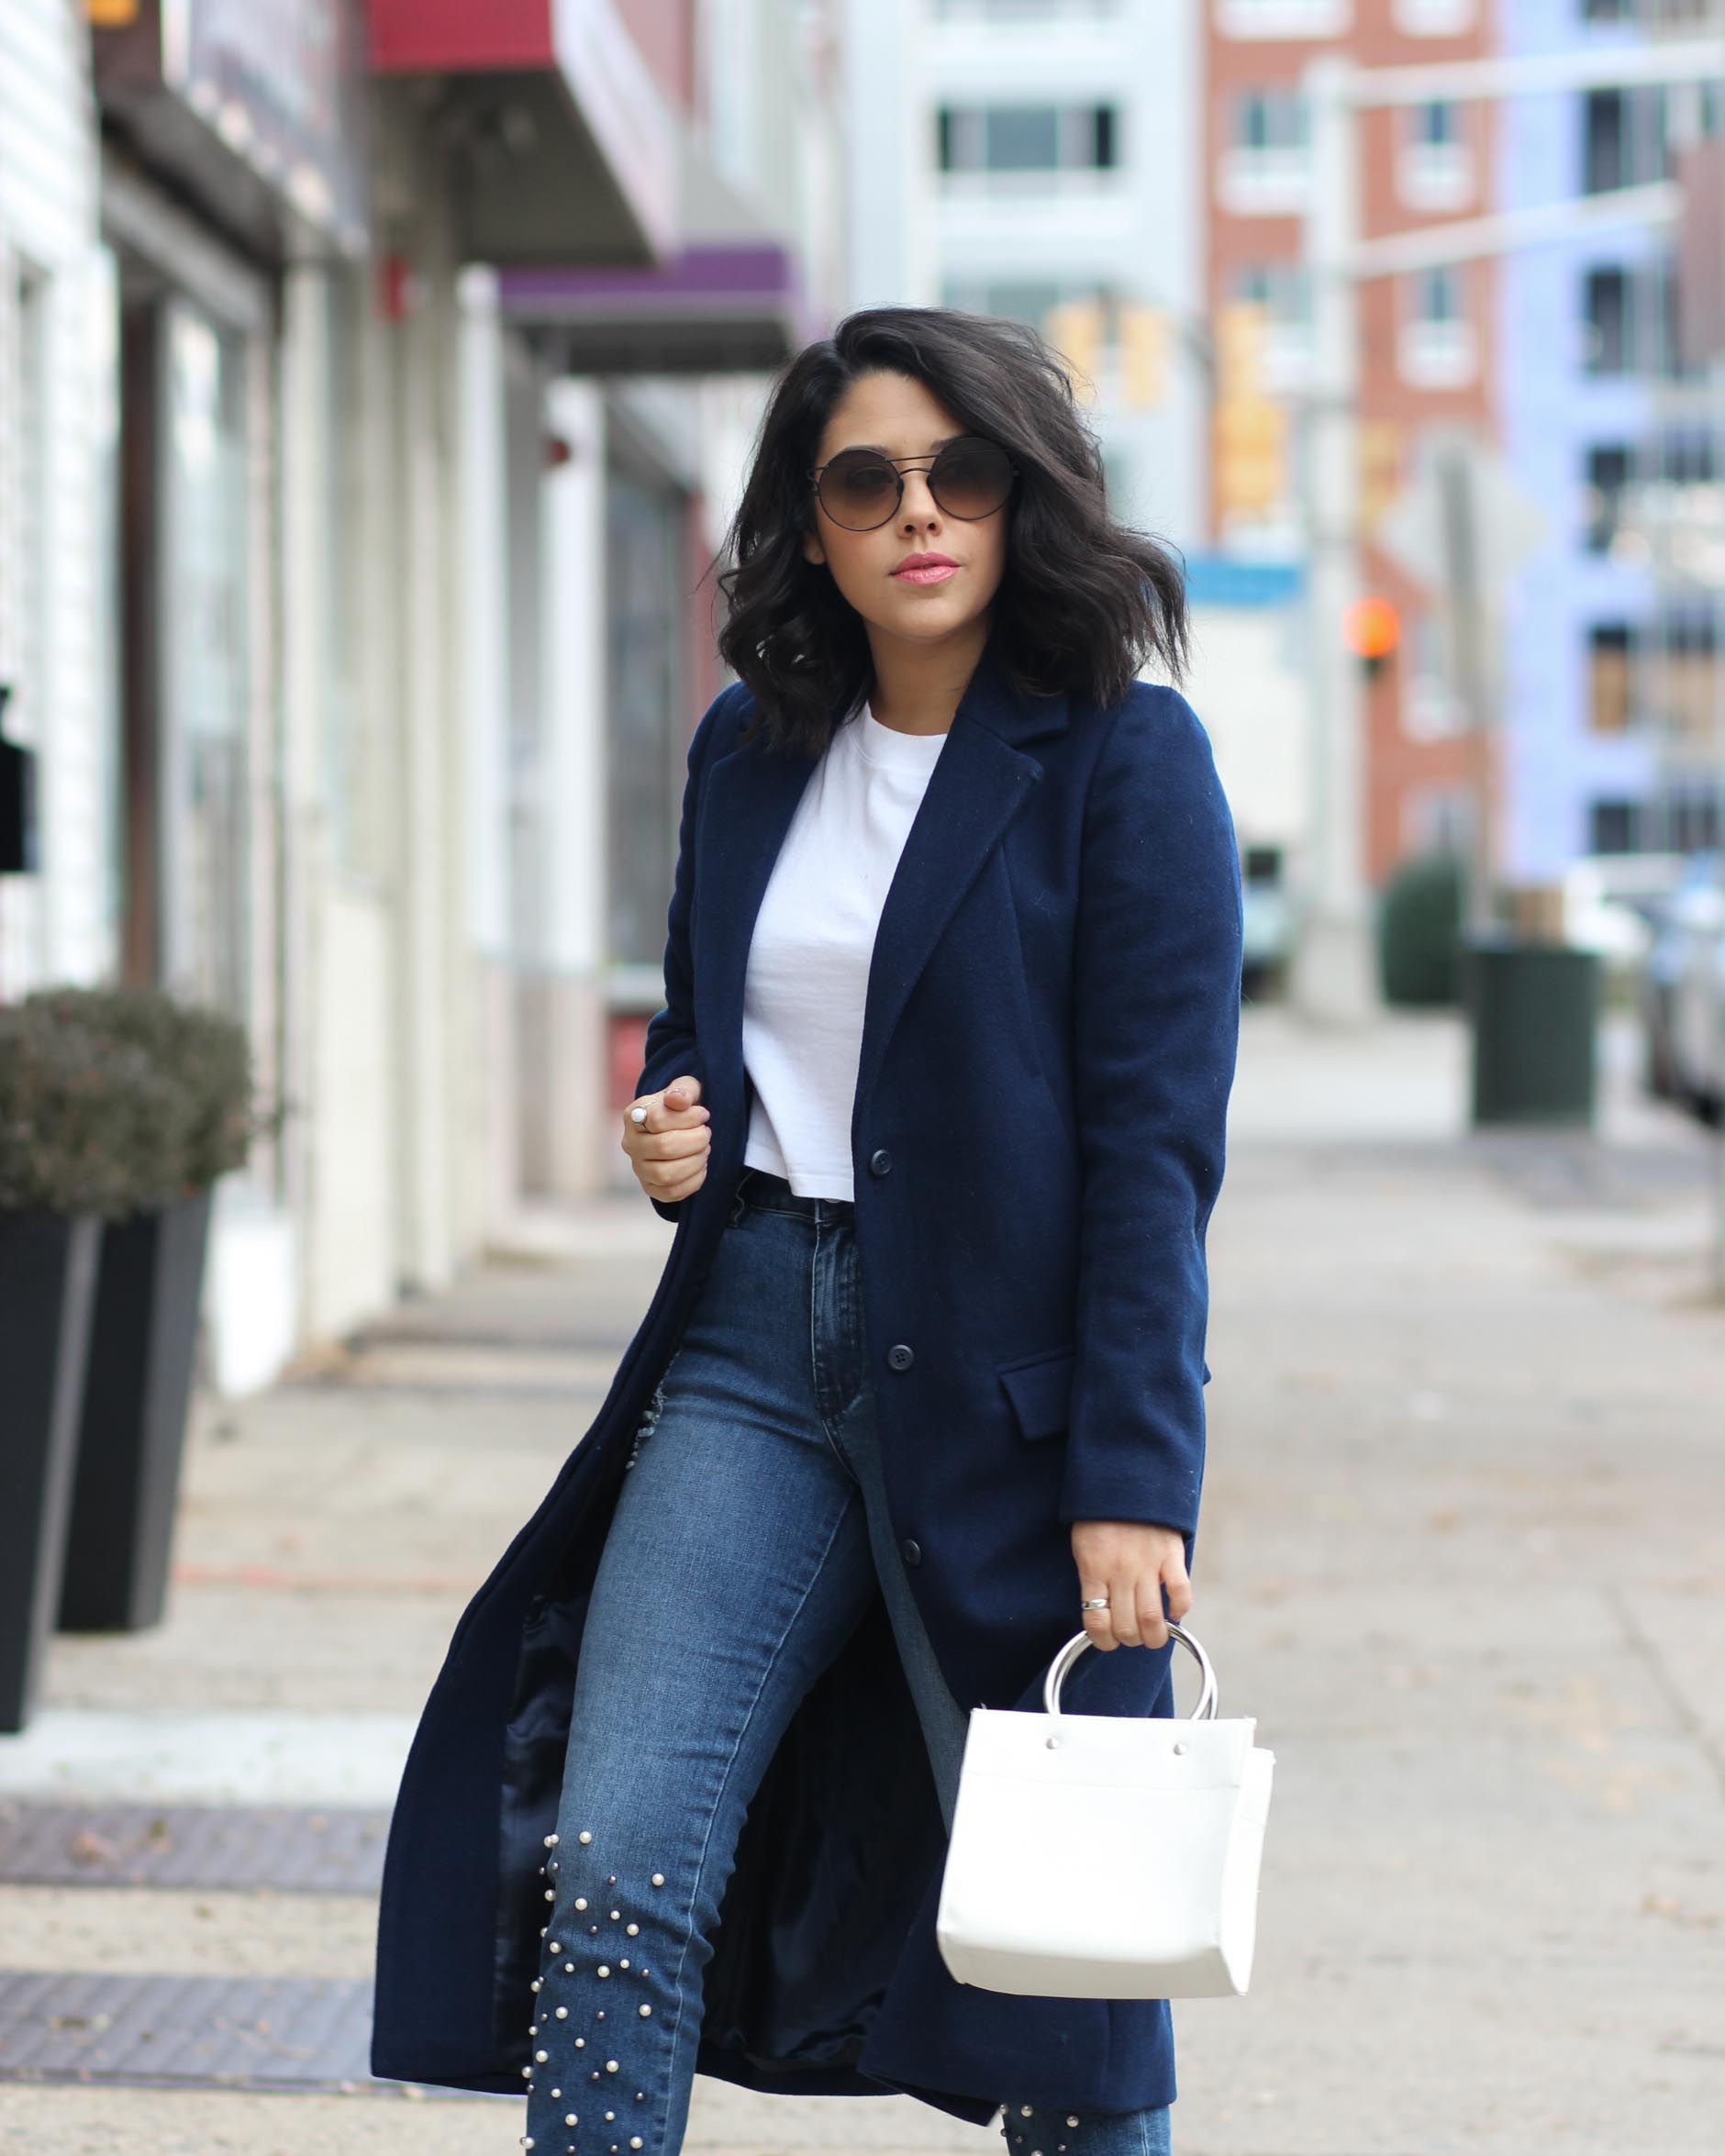 lifestyle blogger naty michele wearing pearl jeans and navy coat